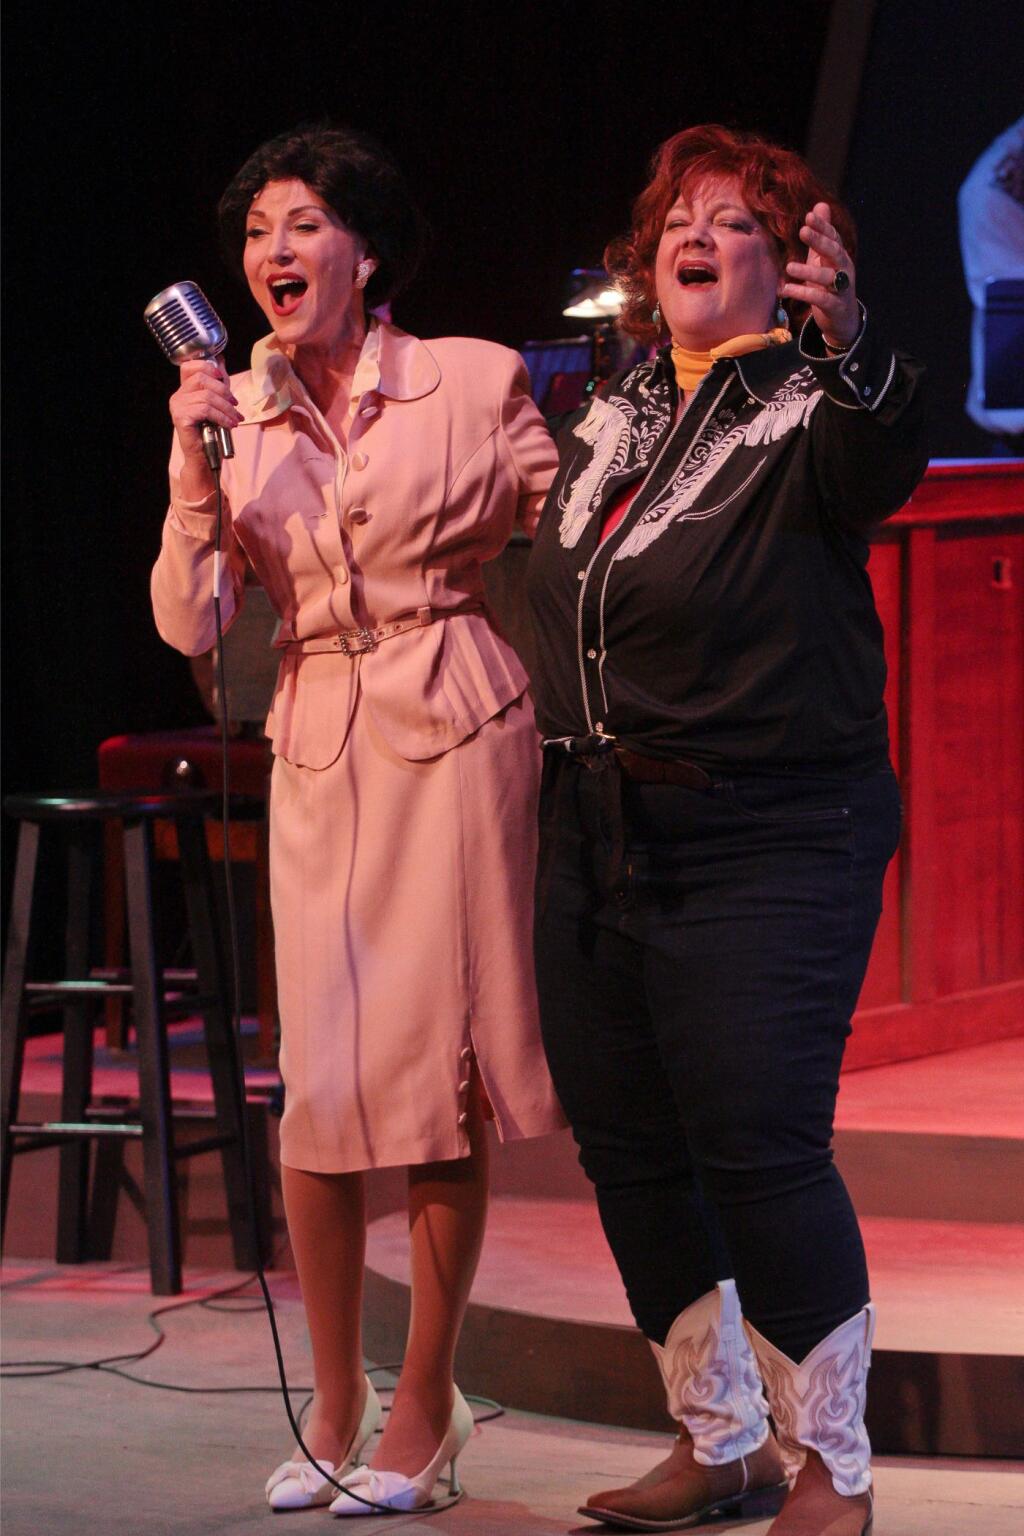 Shannon Rider, left, stars as country singer Patsy Cline at the 6th Street Playhouse, with Liz Jahren playing her fan and pal Louise. (Eric Chazankin)